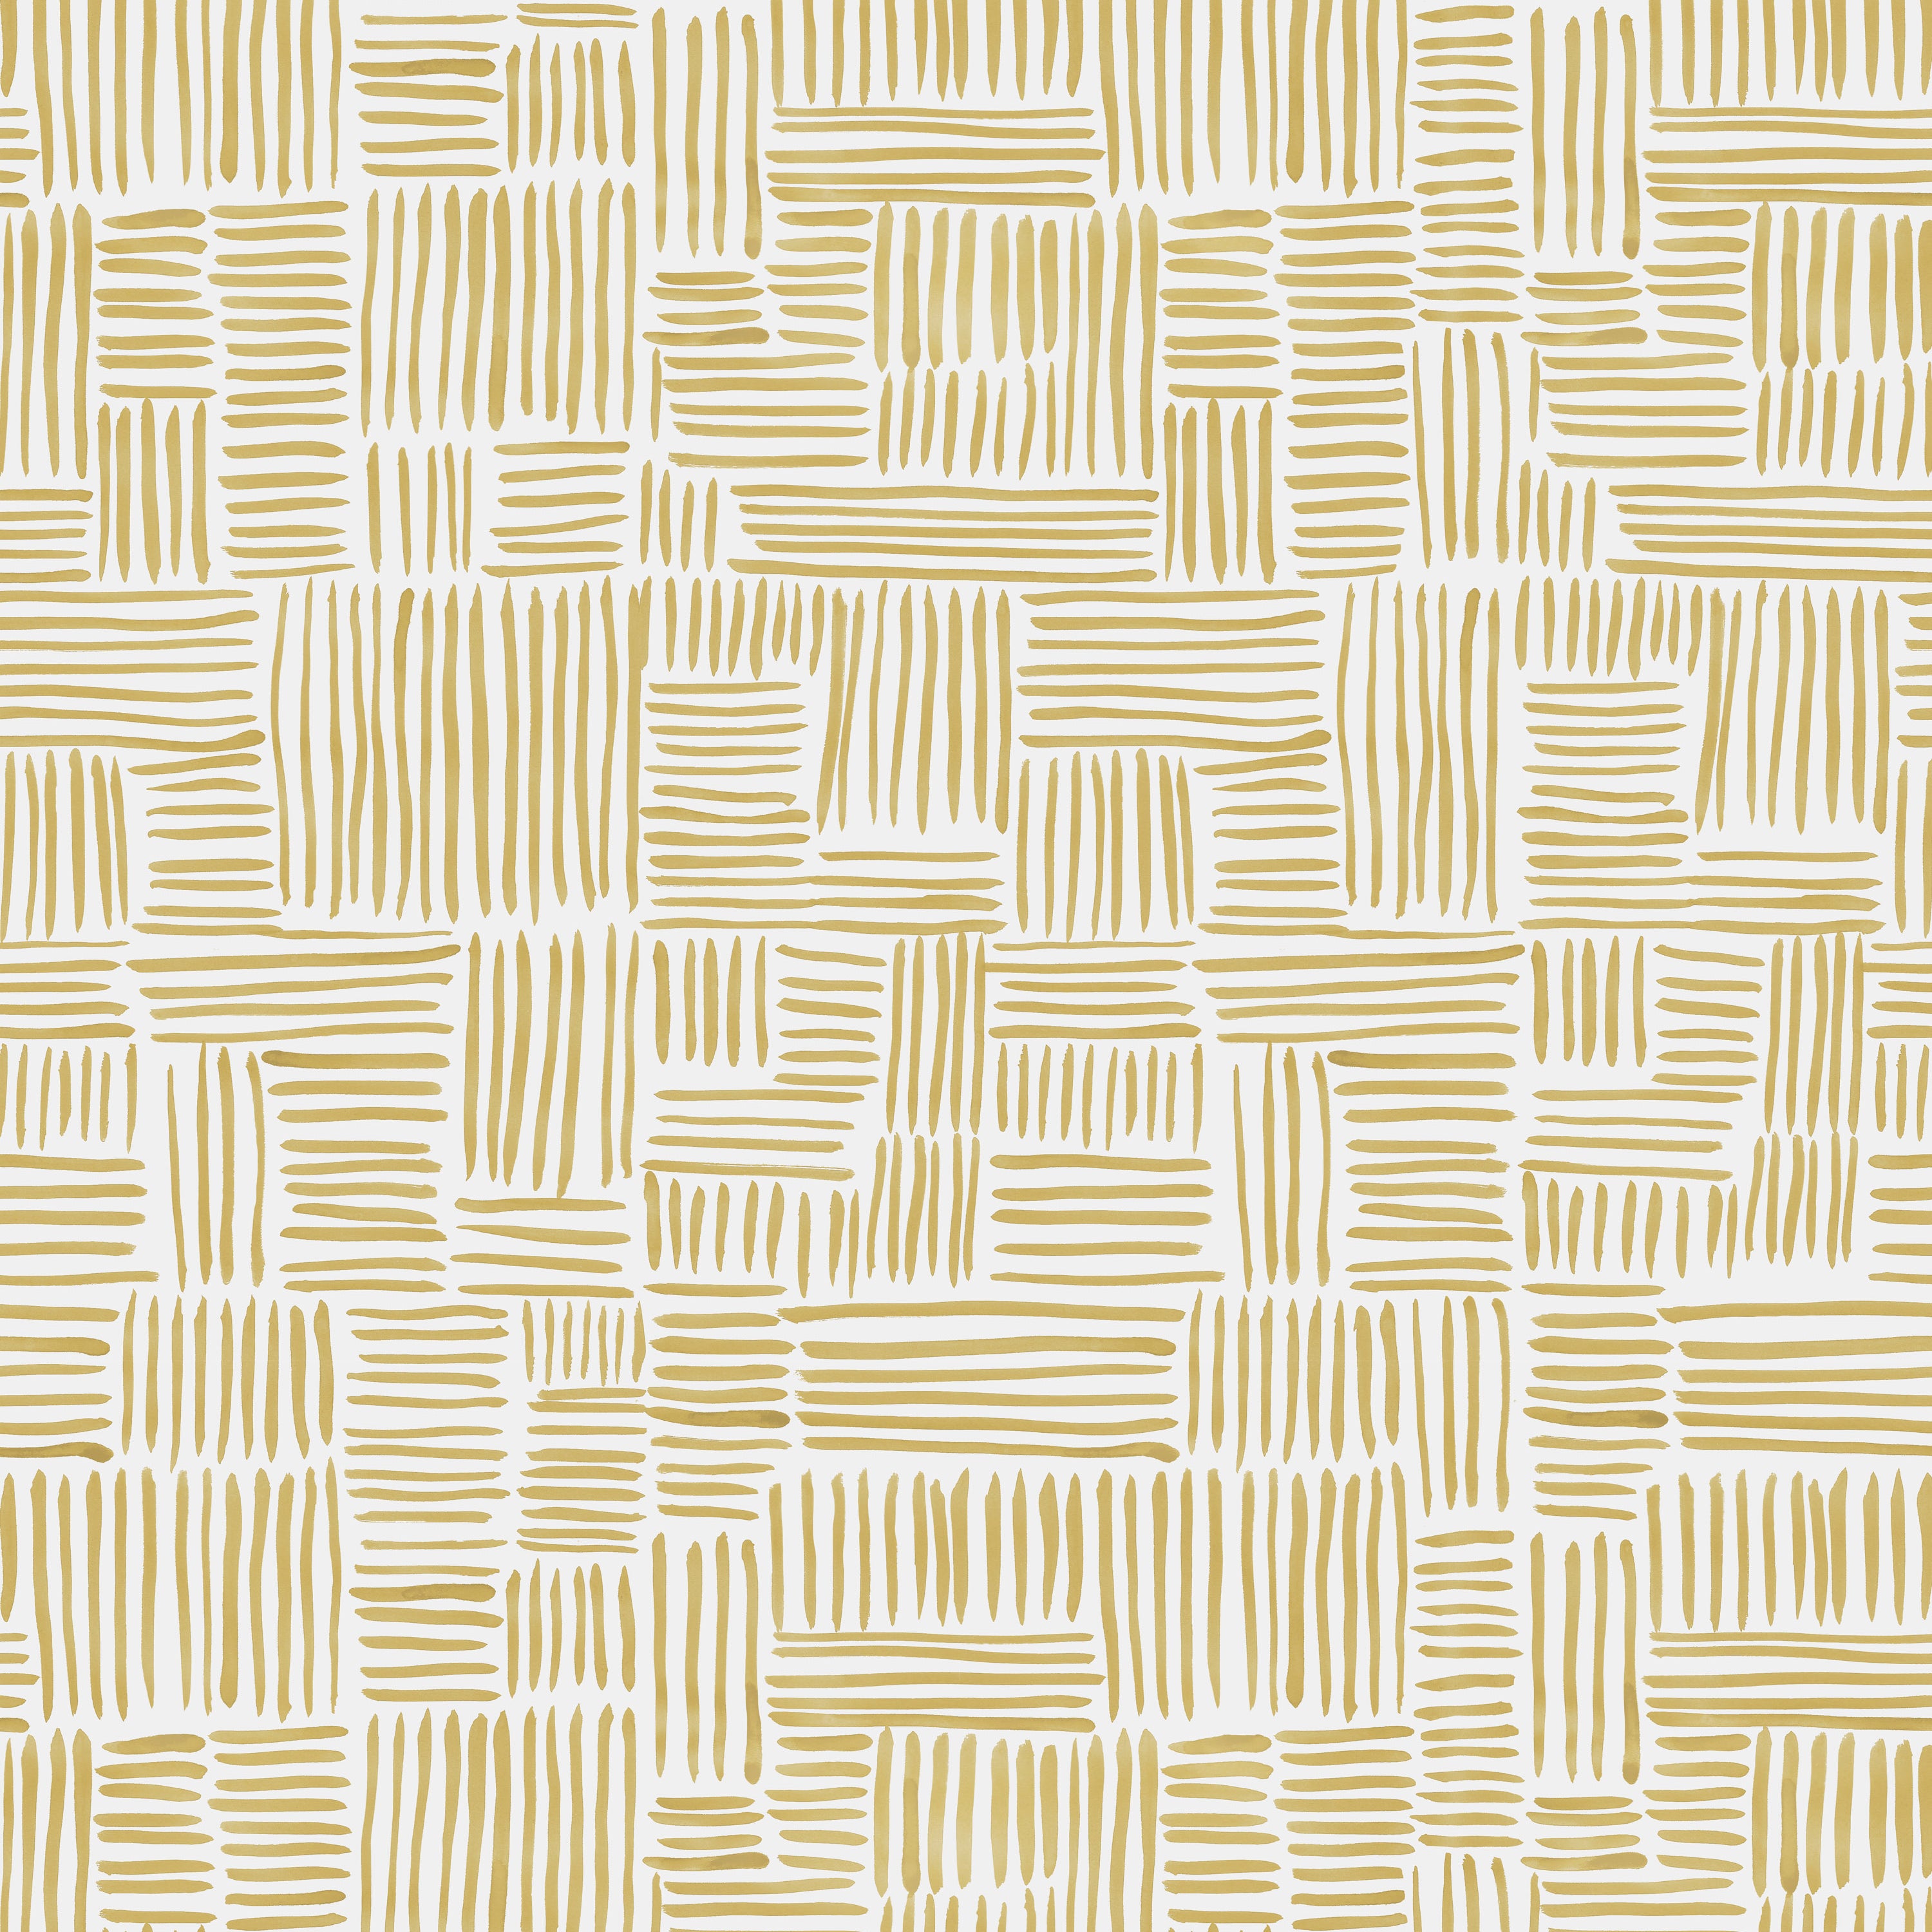 Detail of wallpaper in a directional dash pattern in yellow on a white field.